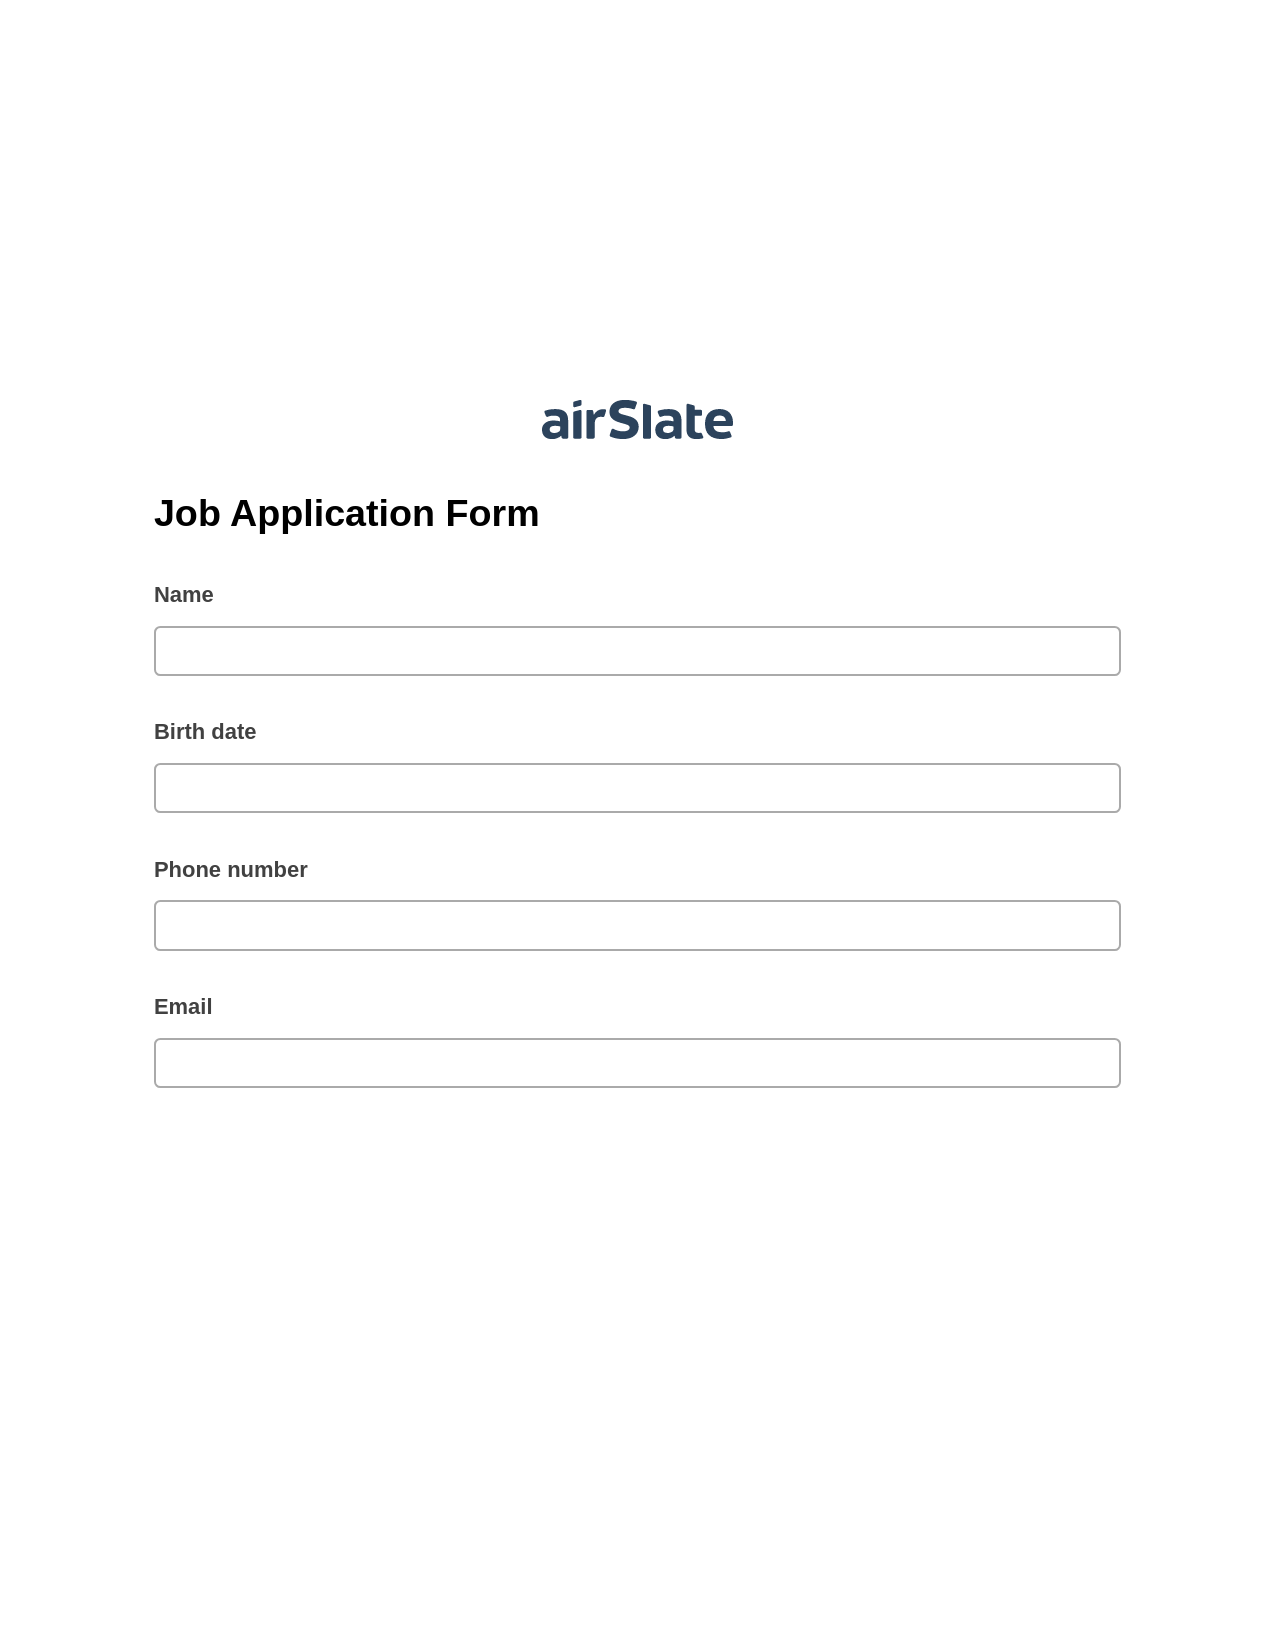 Multirole Job Application Form Pre-fill from CSV File Dropdown Options Bot, Send a Slate to MS Dynamics 365 Contact Bot, Google Drive Bot